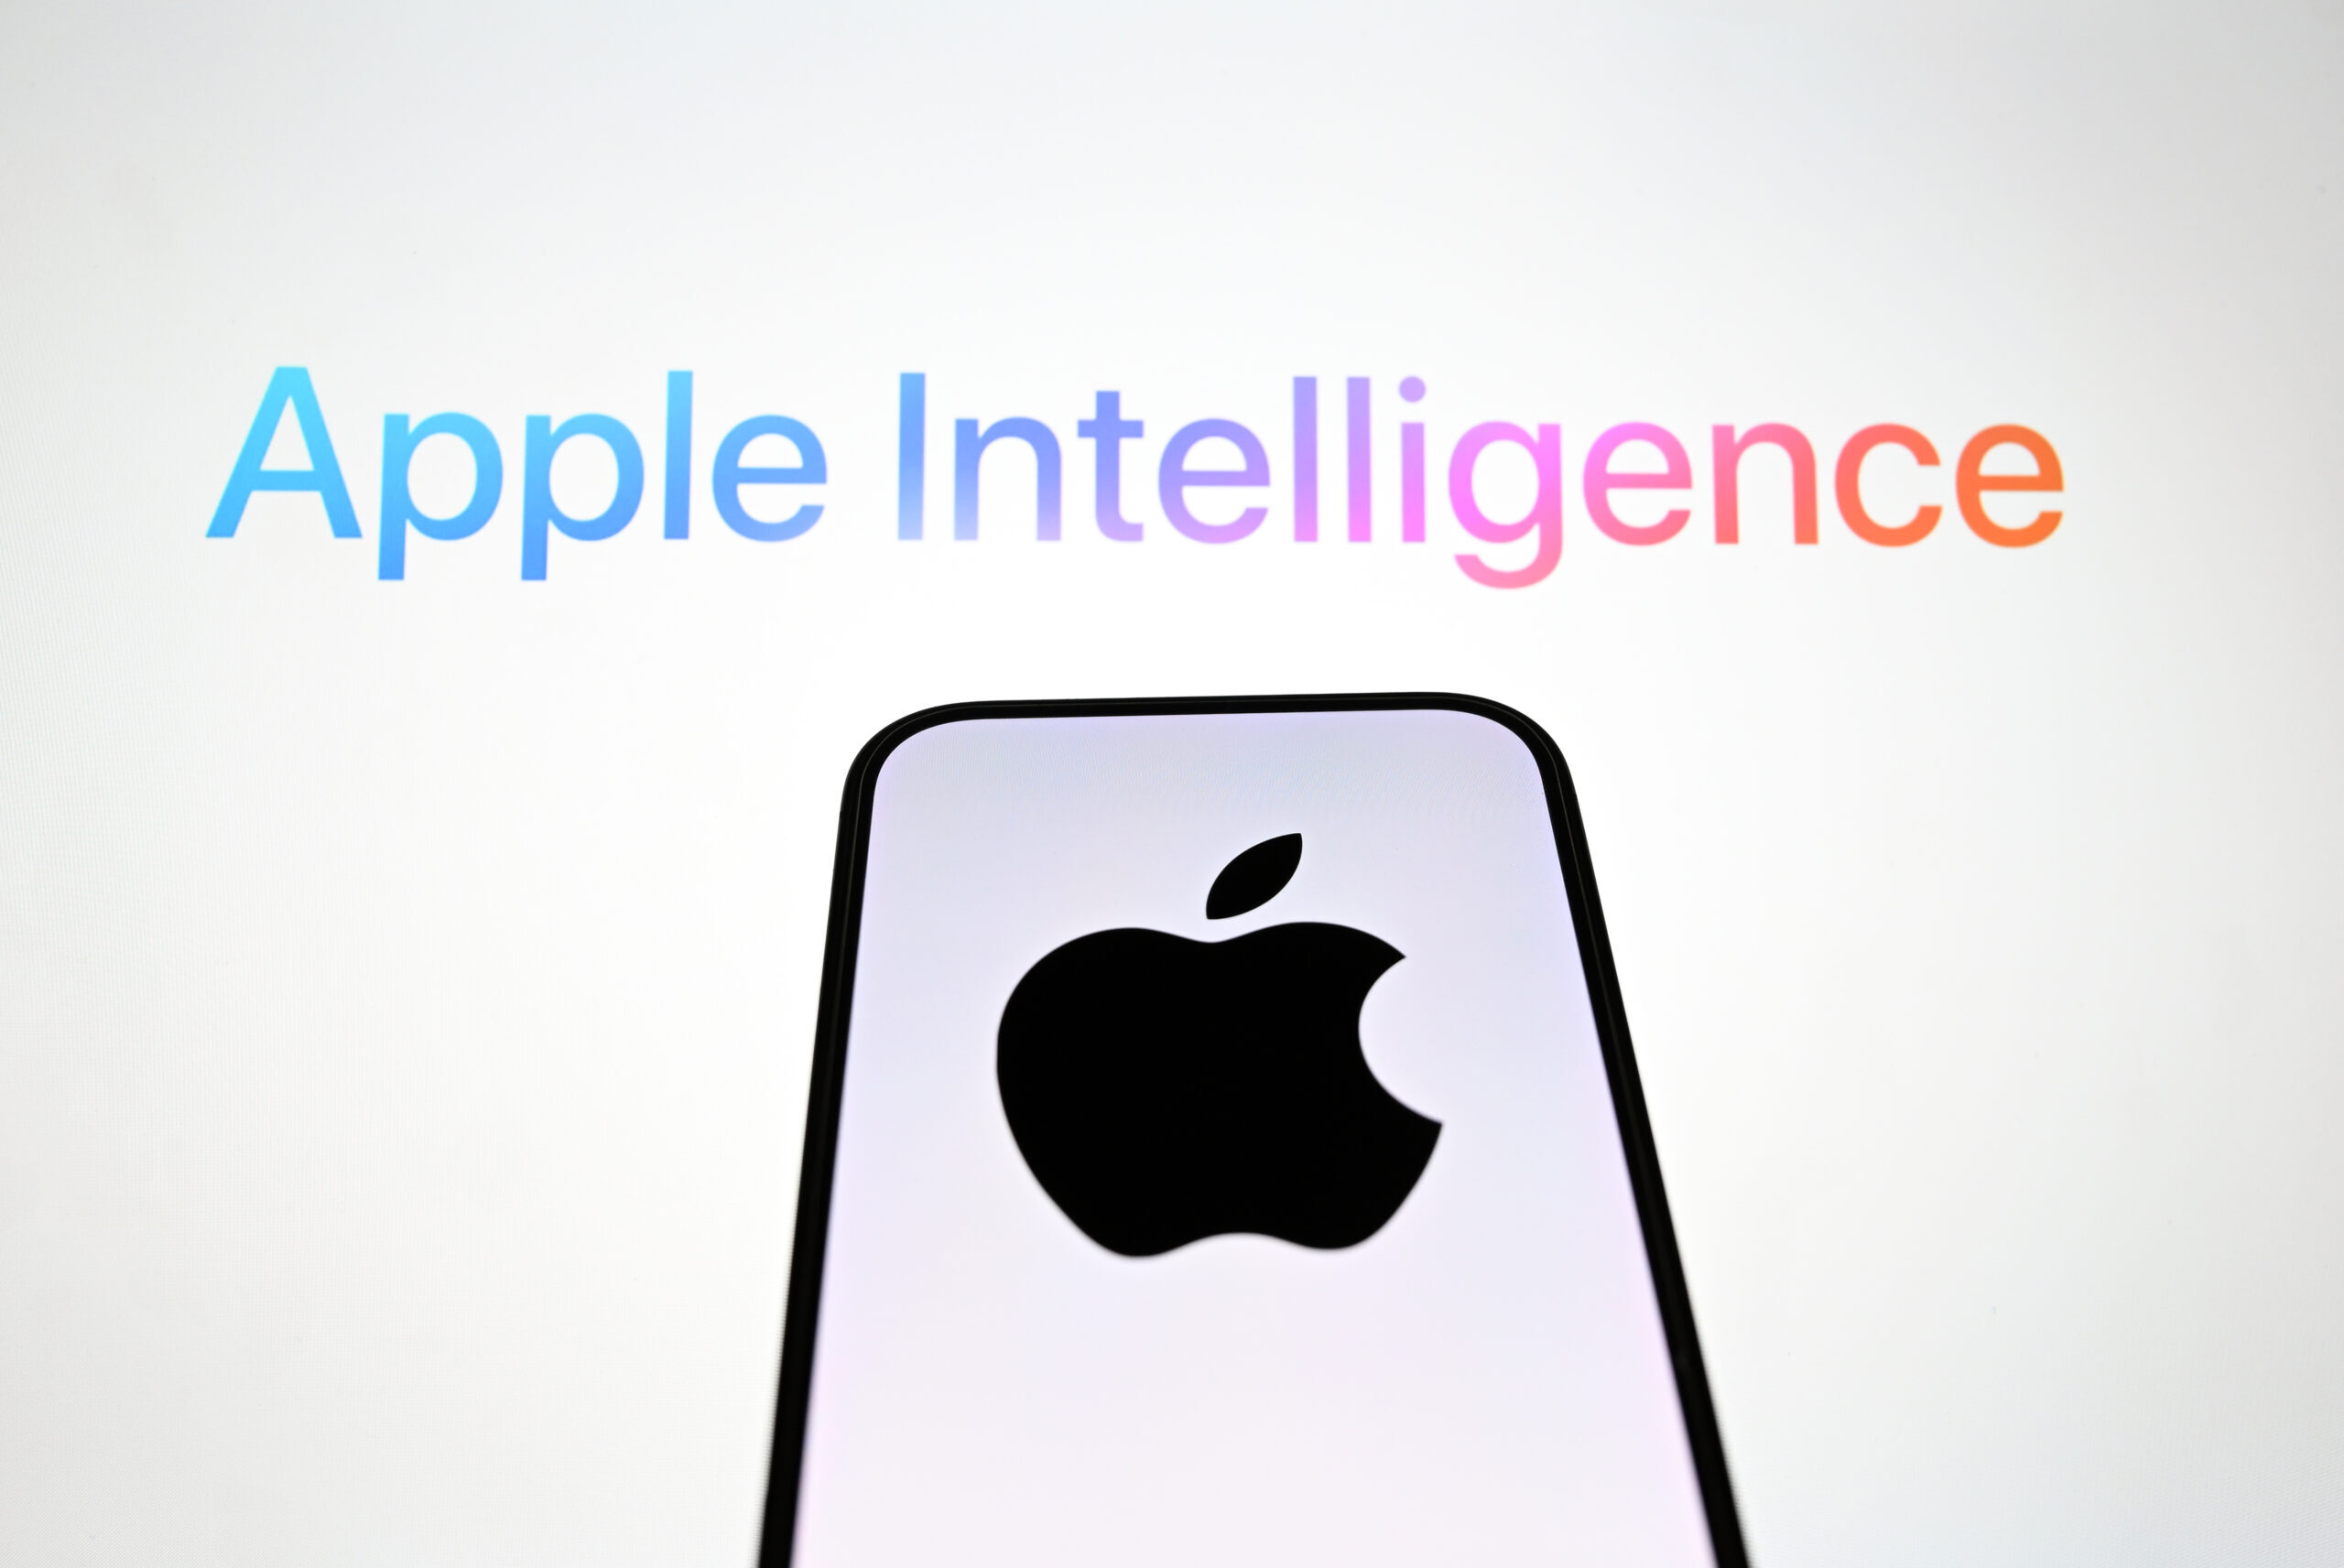 Apple briefly reclaims top stock position amid AI announcements